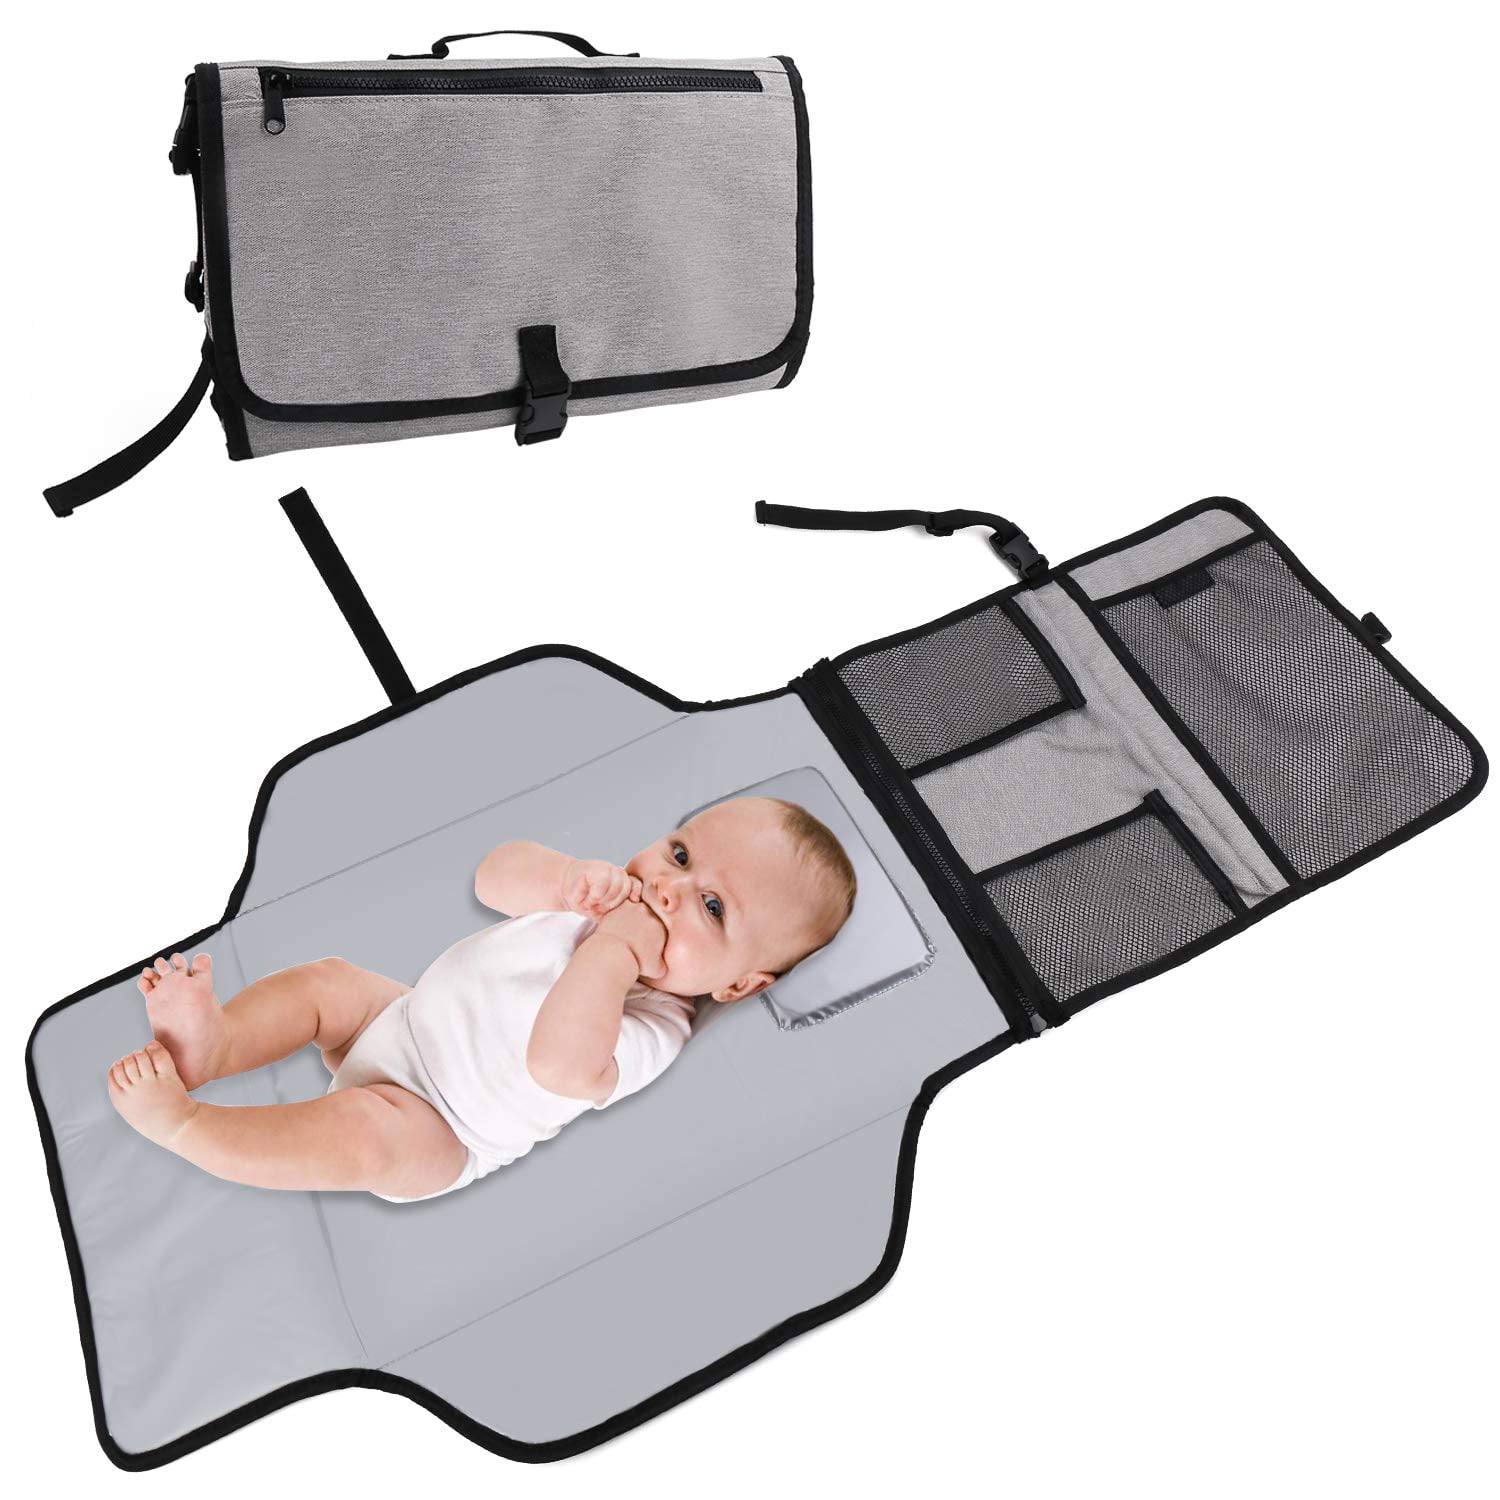 Bermunavy Baby Changing Pad,Portable Diaper Changing Pad Build-in Head Cushion & Zippered Pockets Waterproof Foldable Baby Travel Changing Mat Station for Toddlers Infants and Newborns